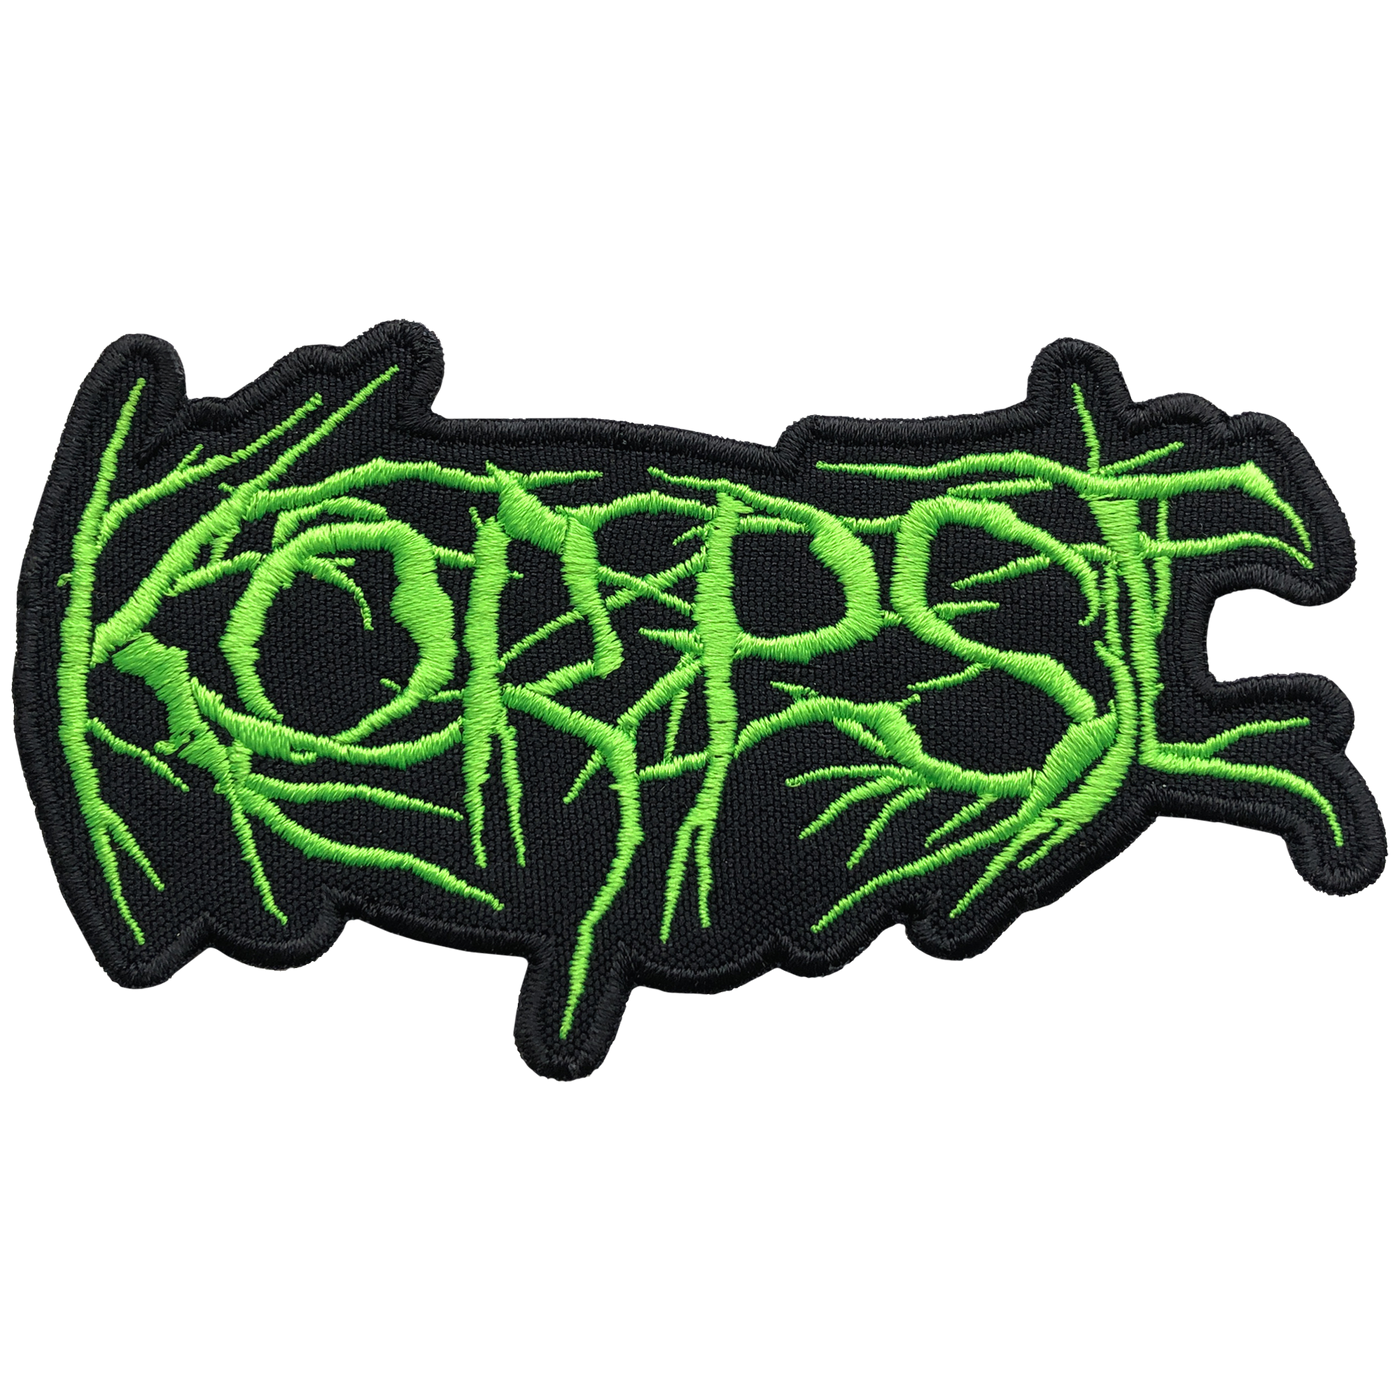 Korpse Patches